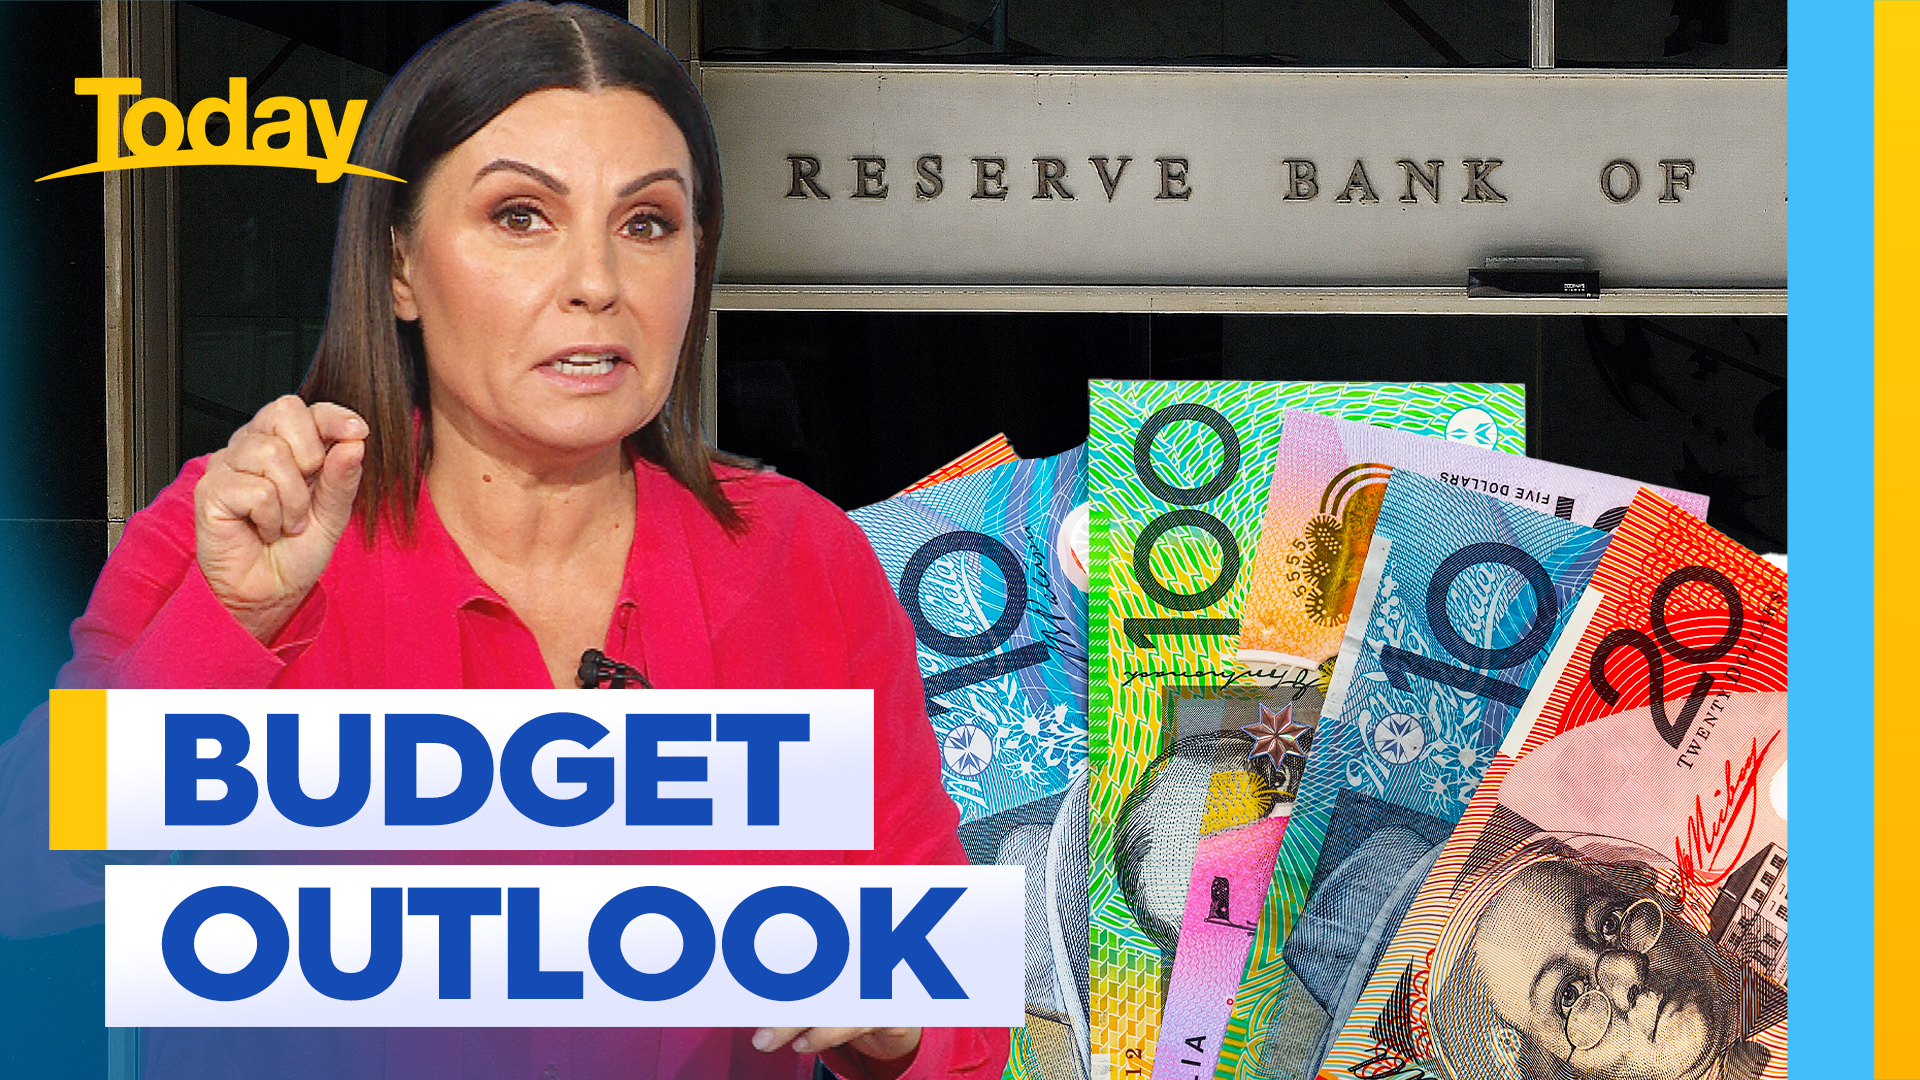 What we know so far about next week's budget announcement